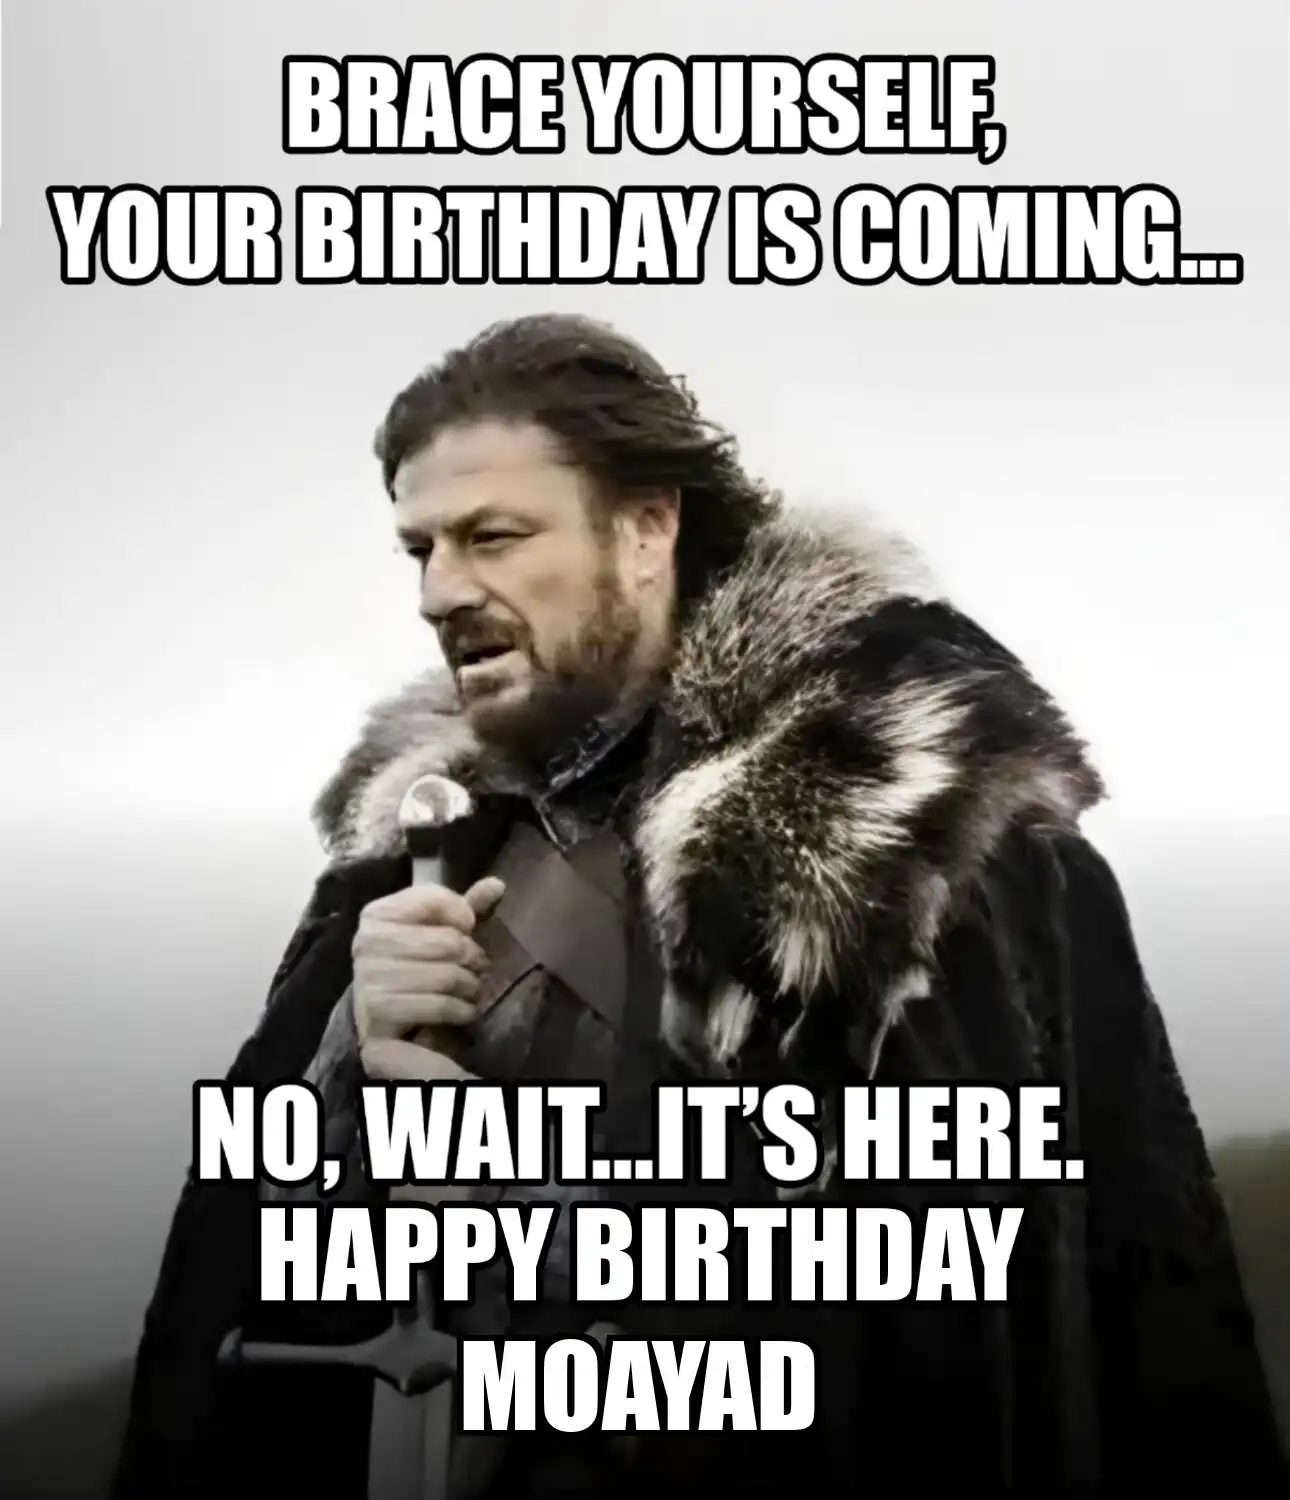 Happy Birthday Moayad Brace Yourself Your Birthday Is Coming Meme